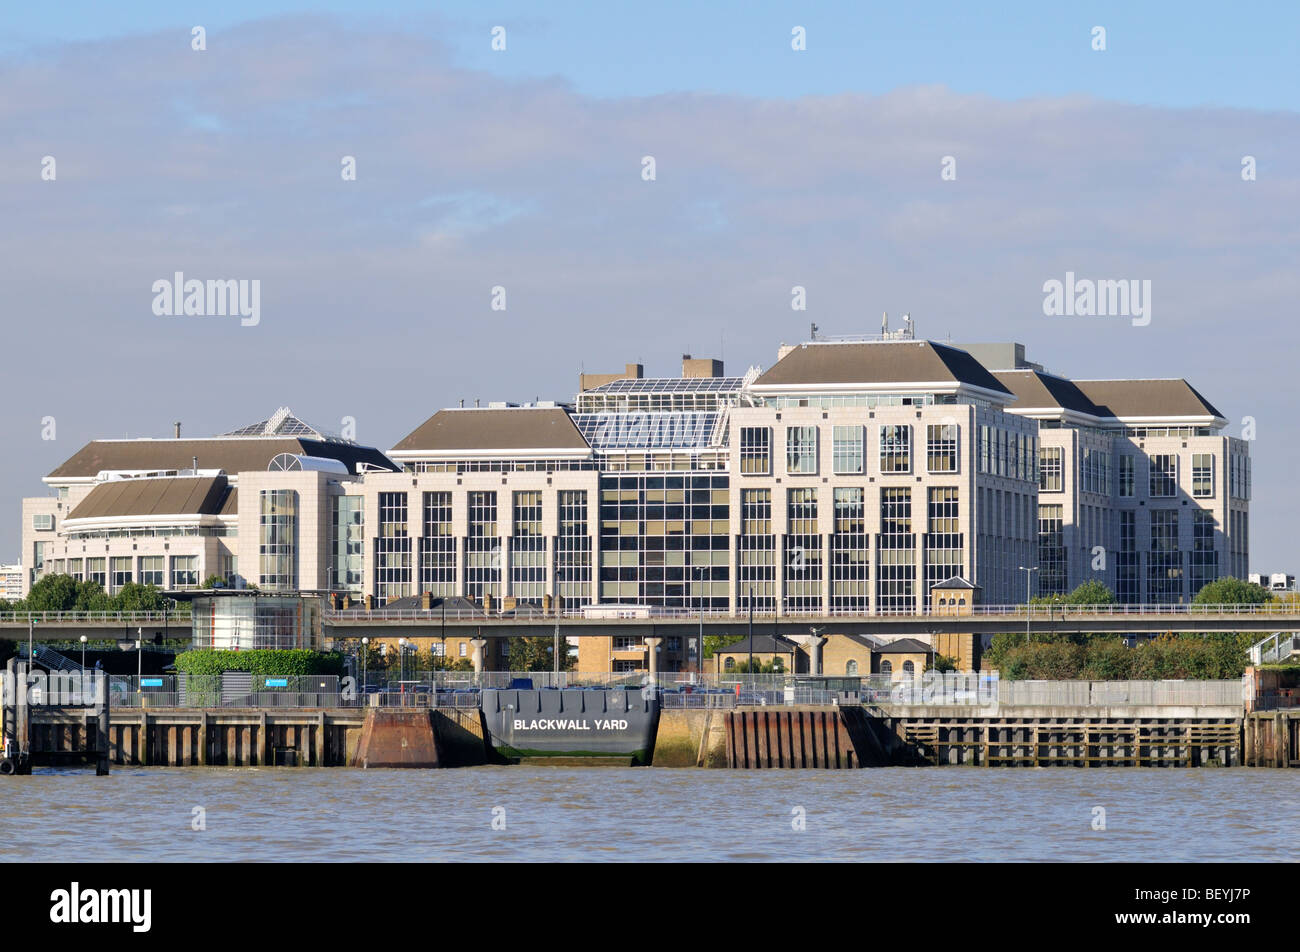 London Borough of Tower Hamlets, Town Hall, Mulberry Place, 5 Clove Crescent, East India Dock, London E14 2BG, United Kingdom Stock Photo